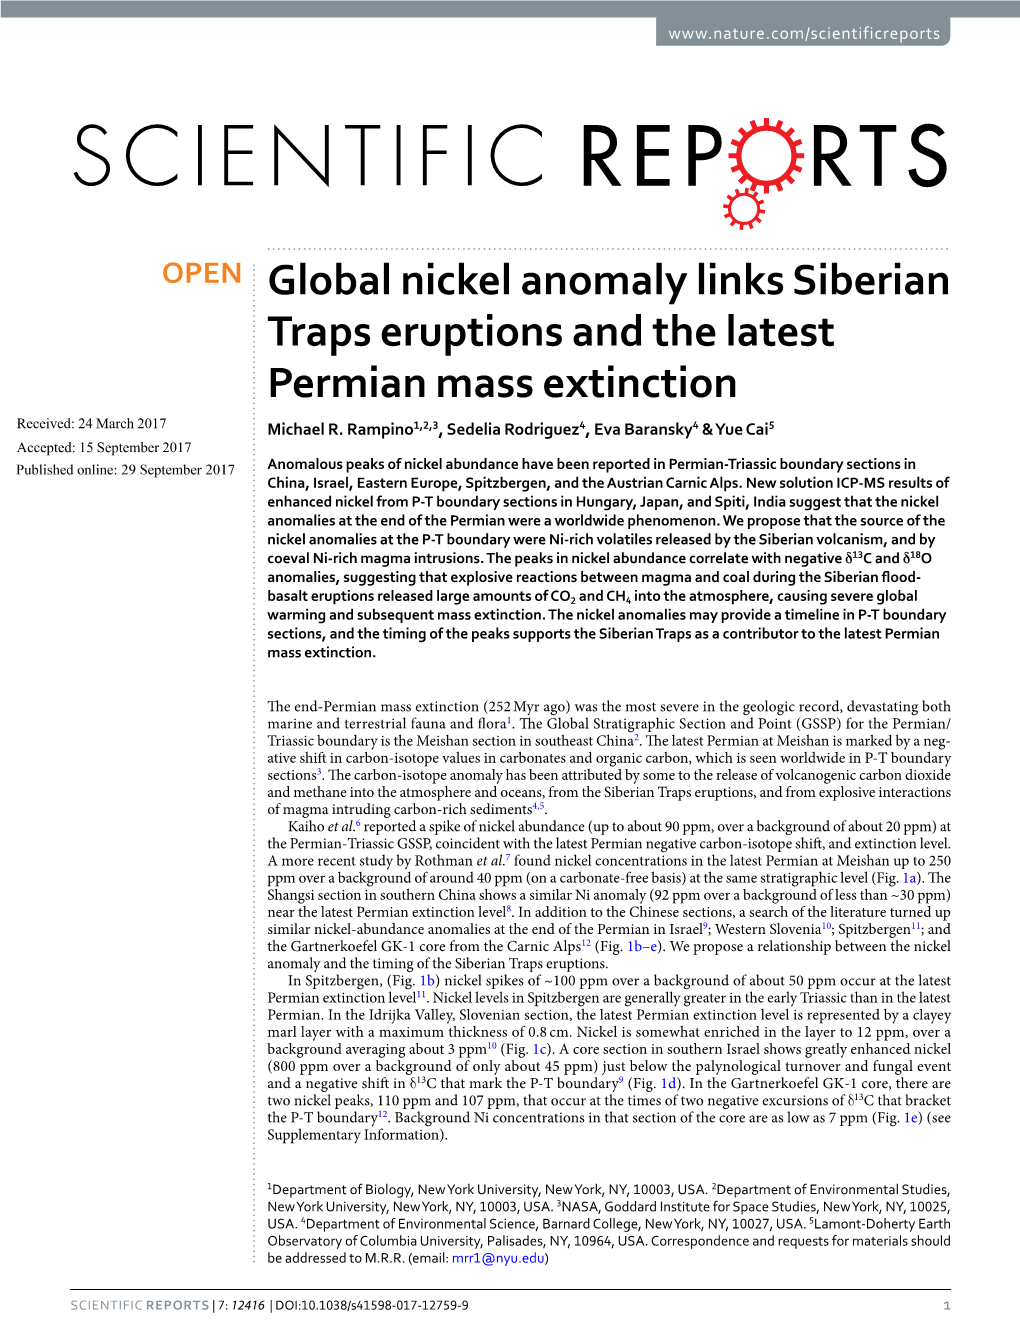 Global Nickel Anomaly Links Siberian Traps Eruptions and the Latest Permian Mass Extinction Received: 24 March 2017 Michael R